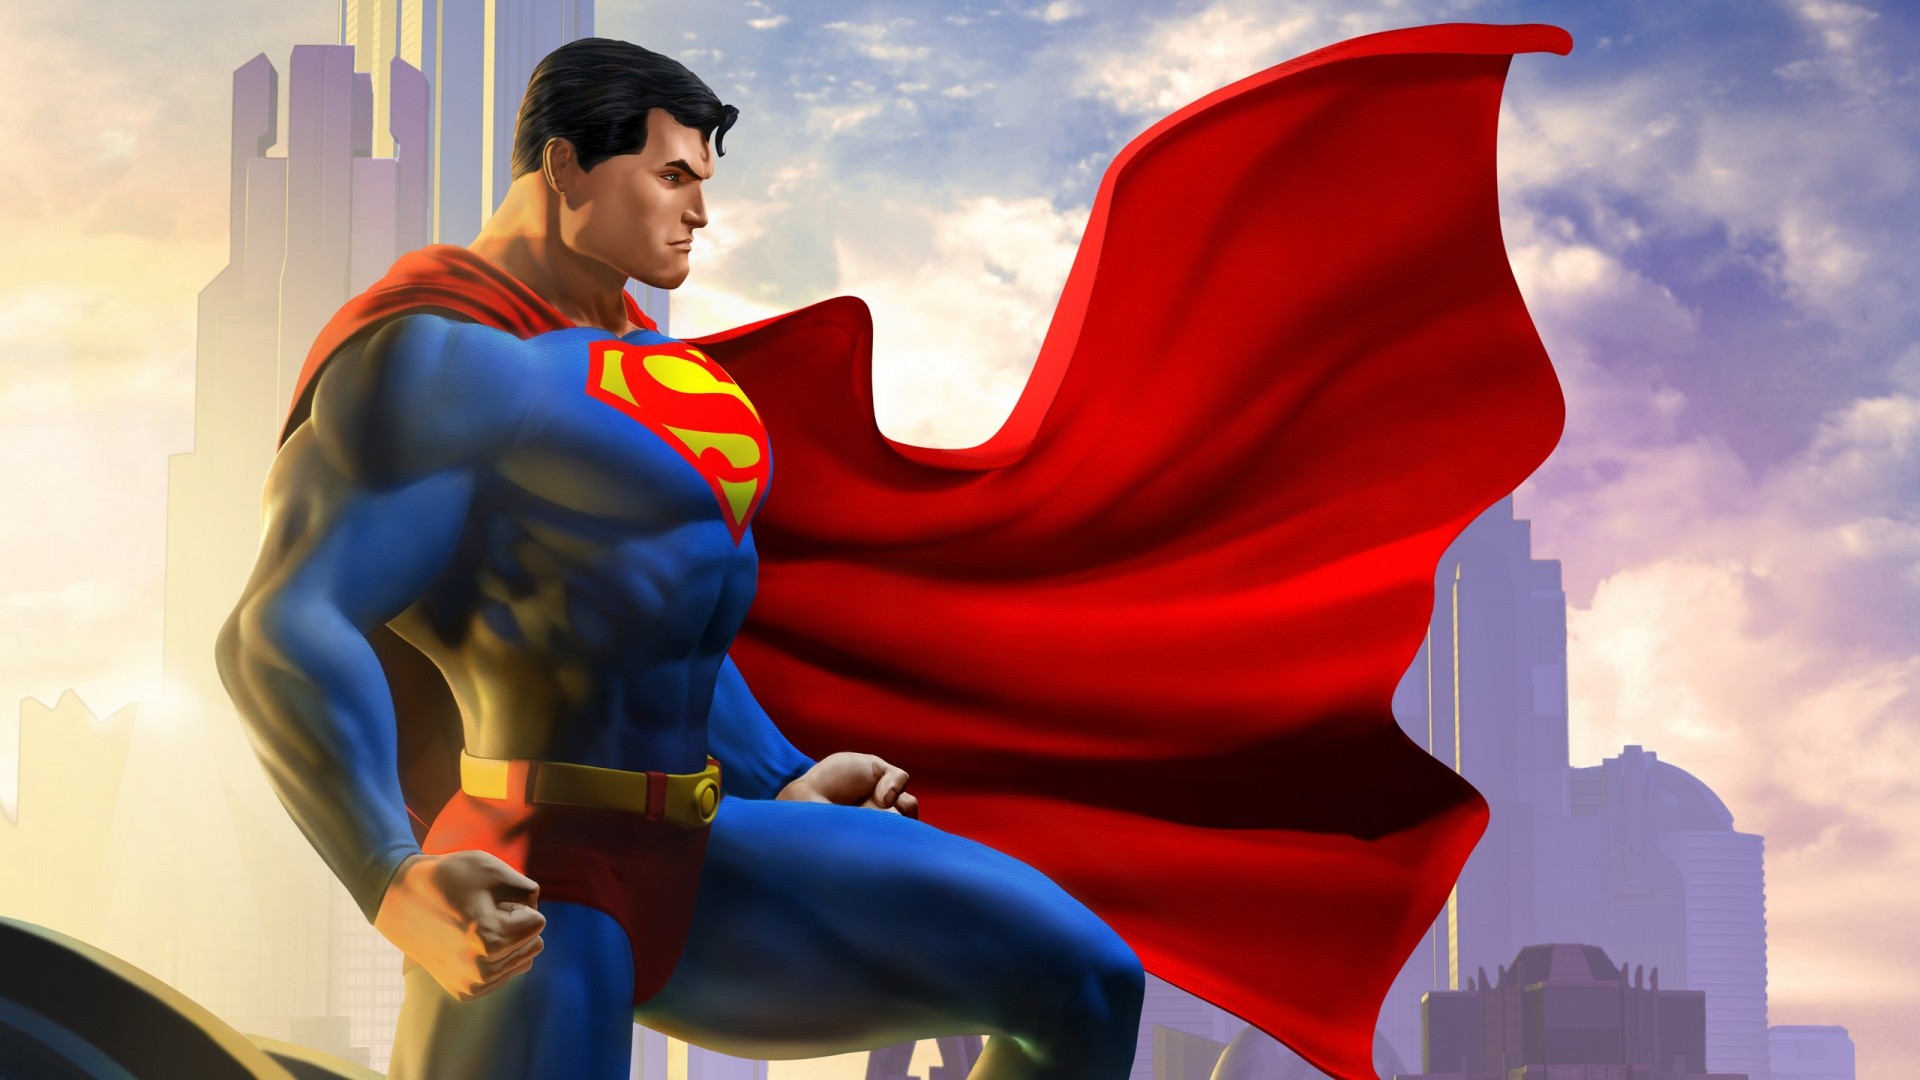 1920x1080 Superman-Wallpaper-Backgrounds-HD-Free-Download-02